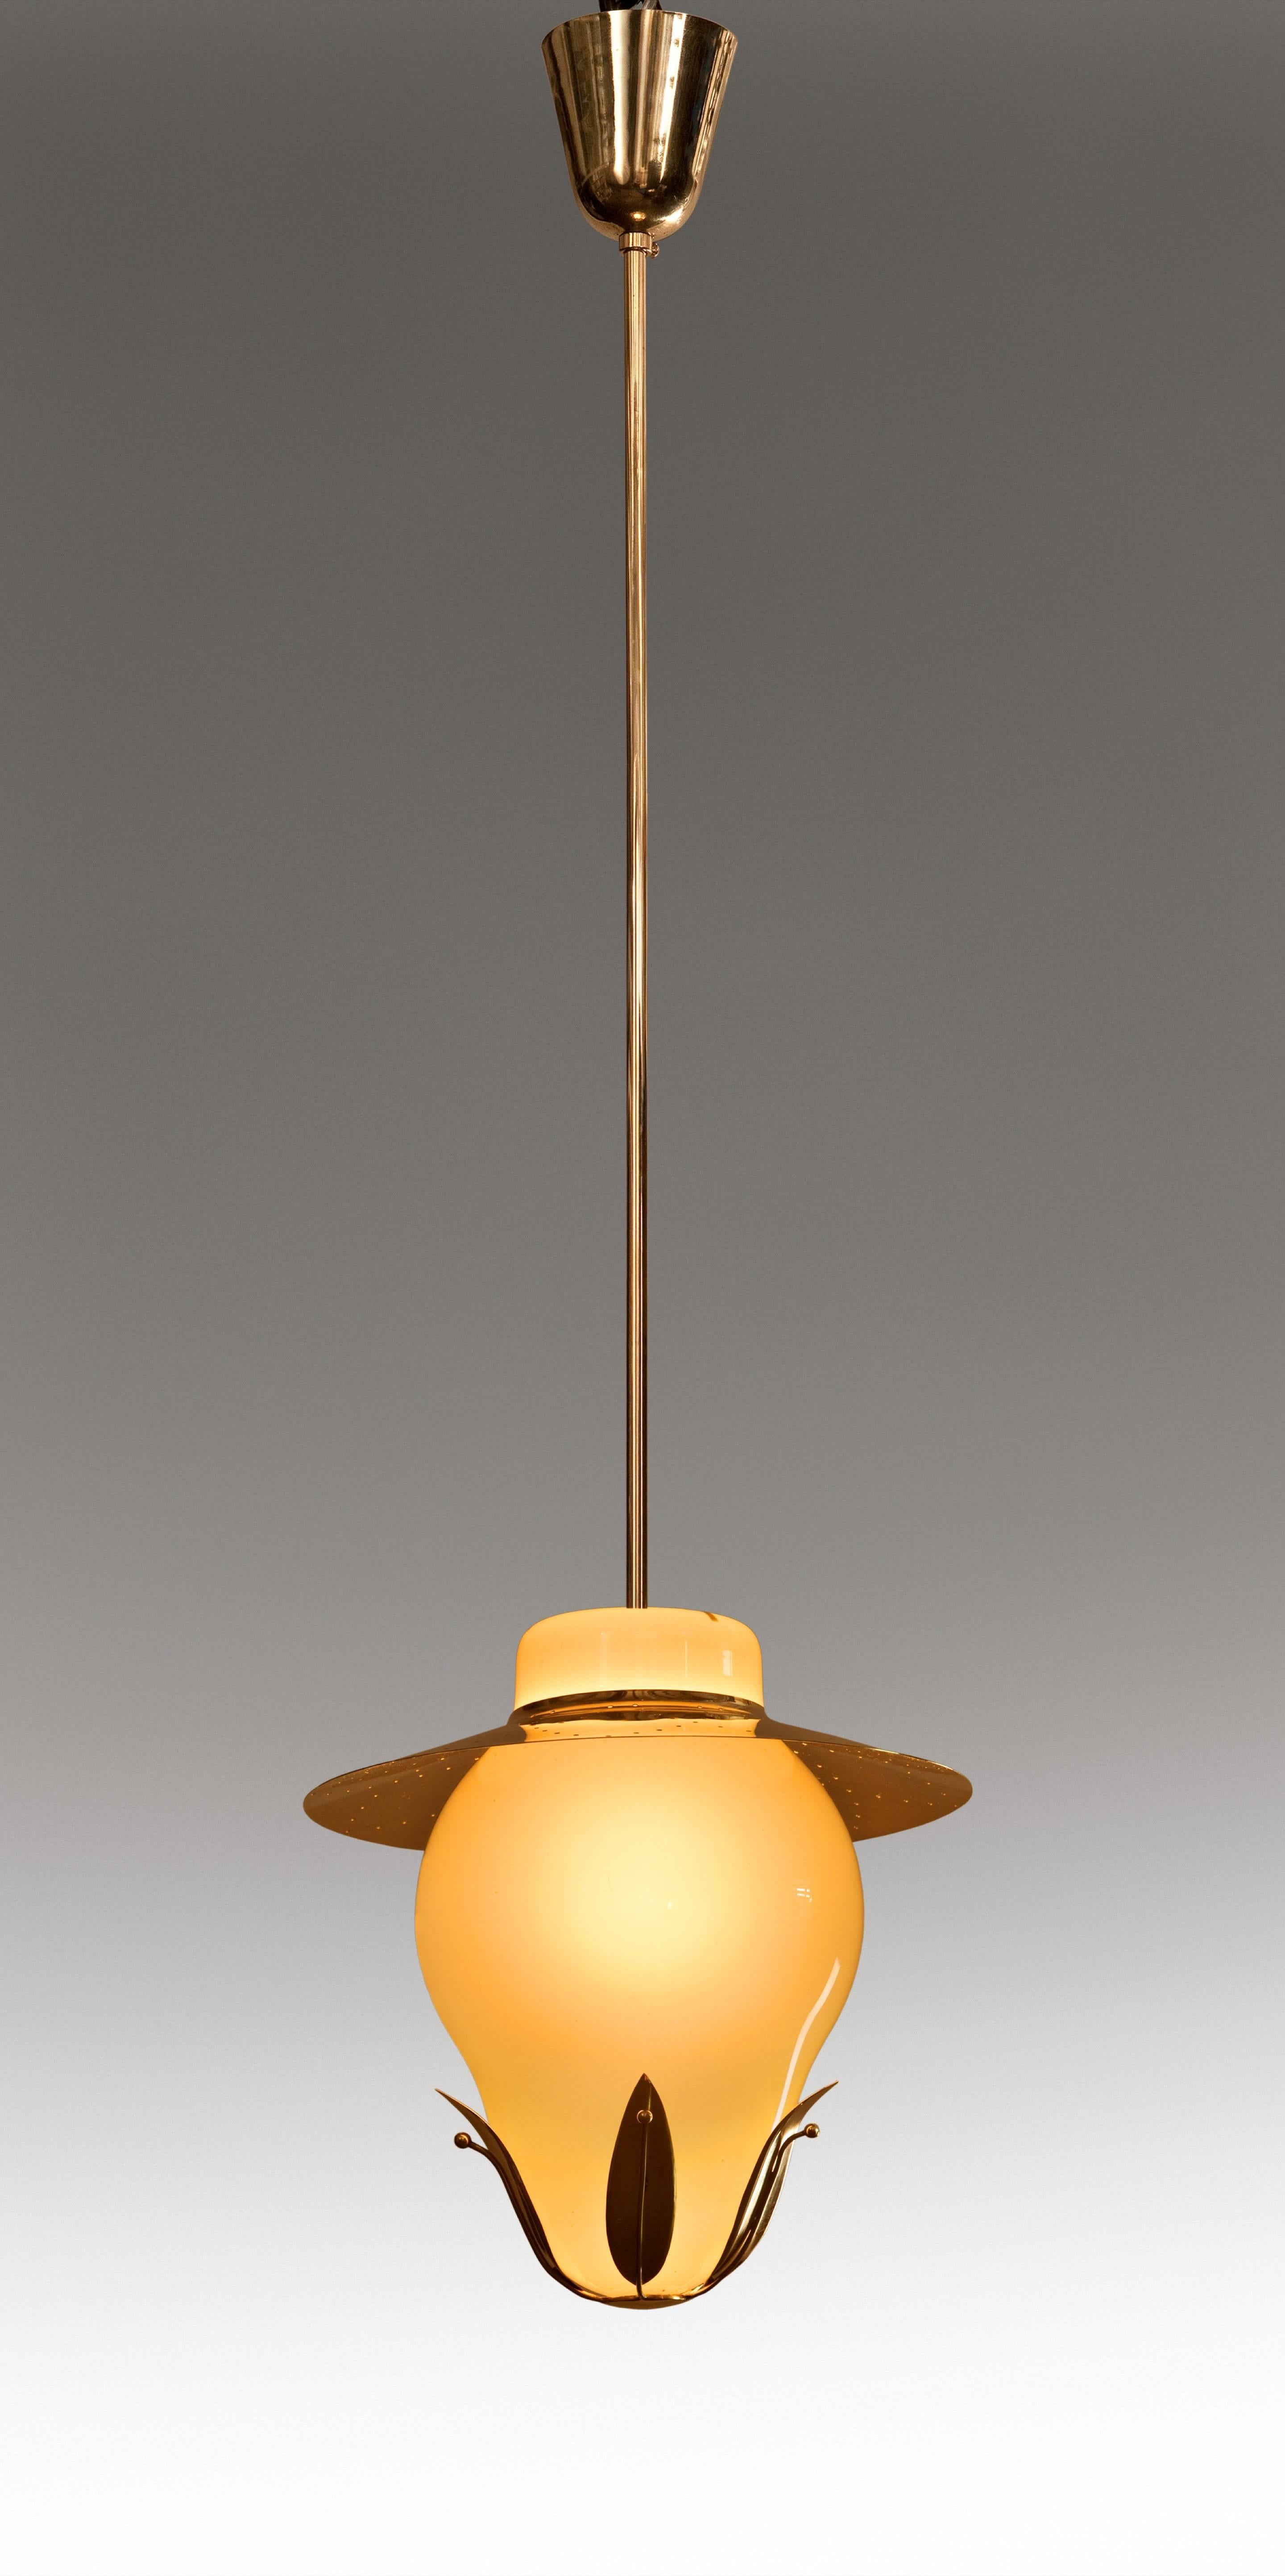 Paavo Tynell for Taito Oy, Finnish Opaline Glass and Brass Chandelier, Mid 20th Century
A lovely chandelier with gloriously colored glass and stylish brass. The conical corona, above a hanging rod joined to a shaped case glass diffuser, supporting a